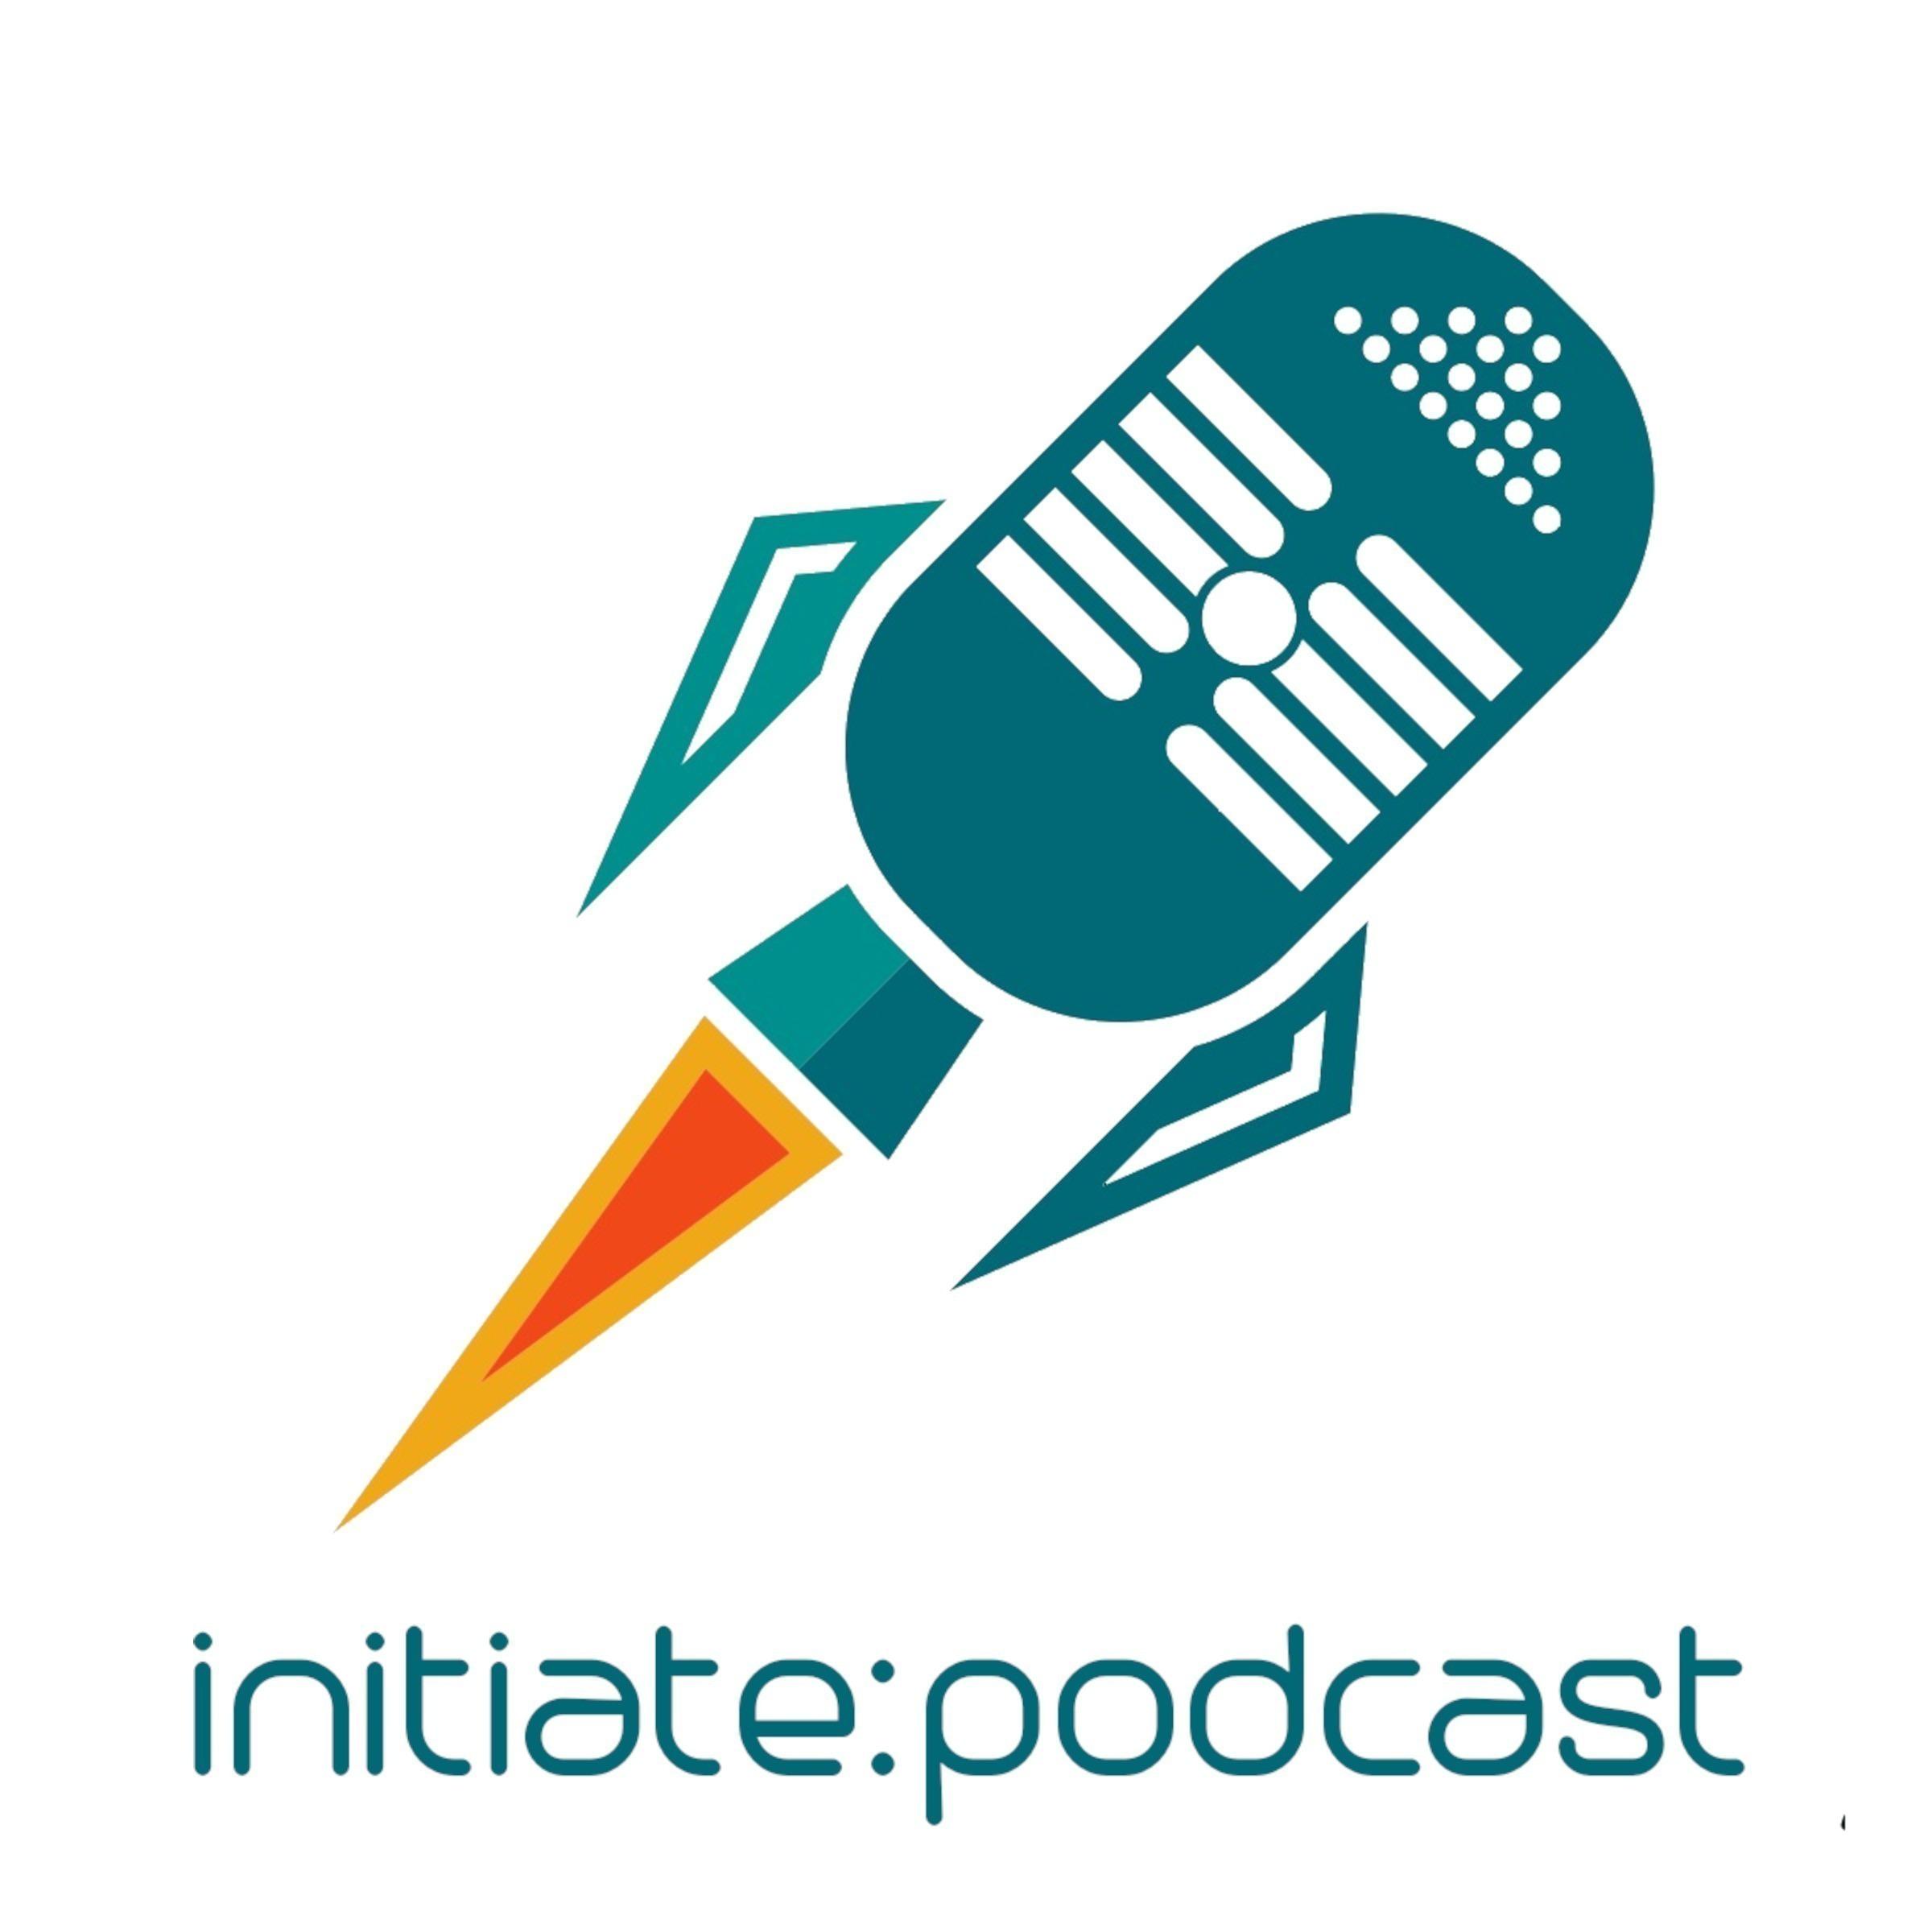 Initiate: Podcast - Build Authority, Engage Your Audience, Increase Revenue - Millette Jones, Cast Global Media